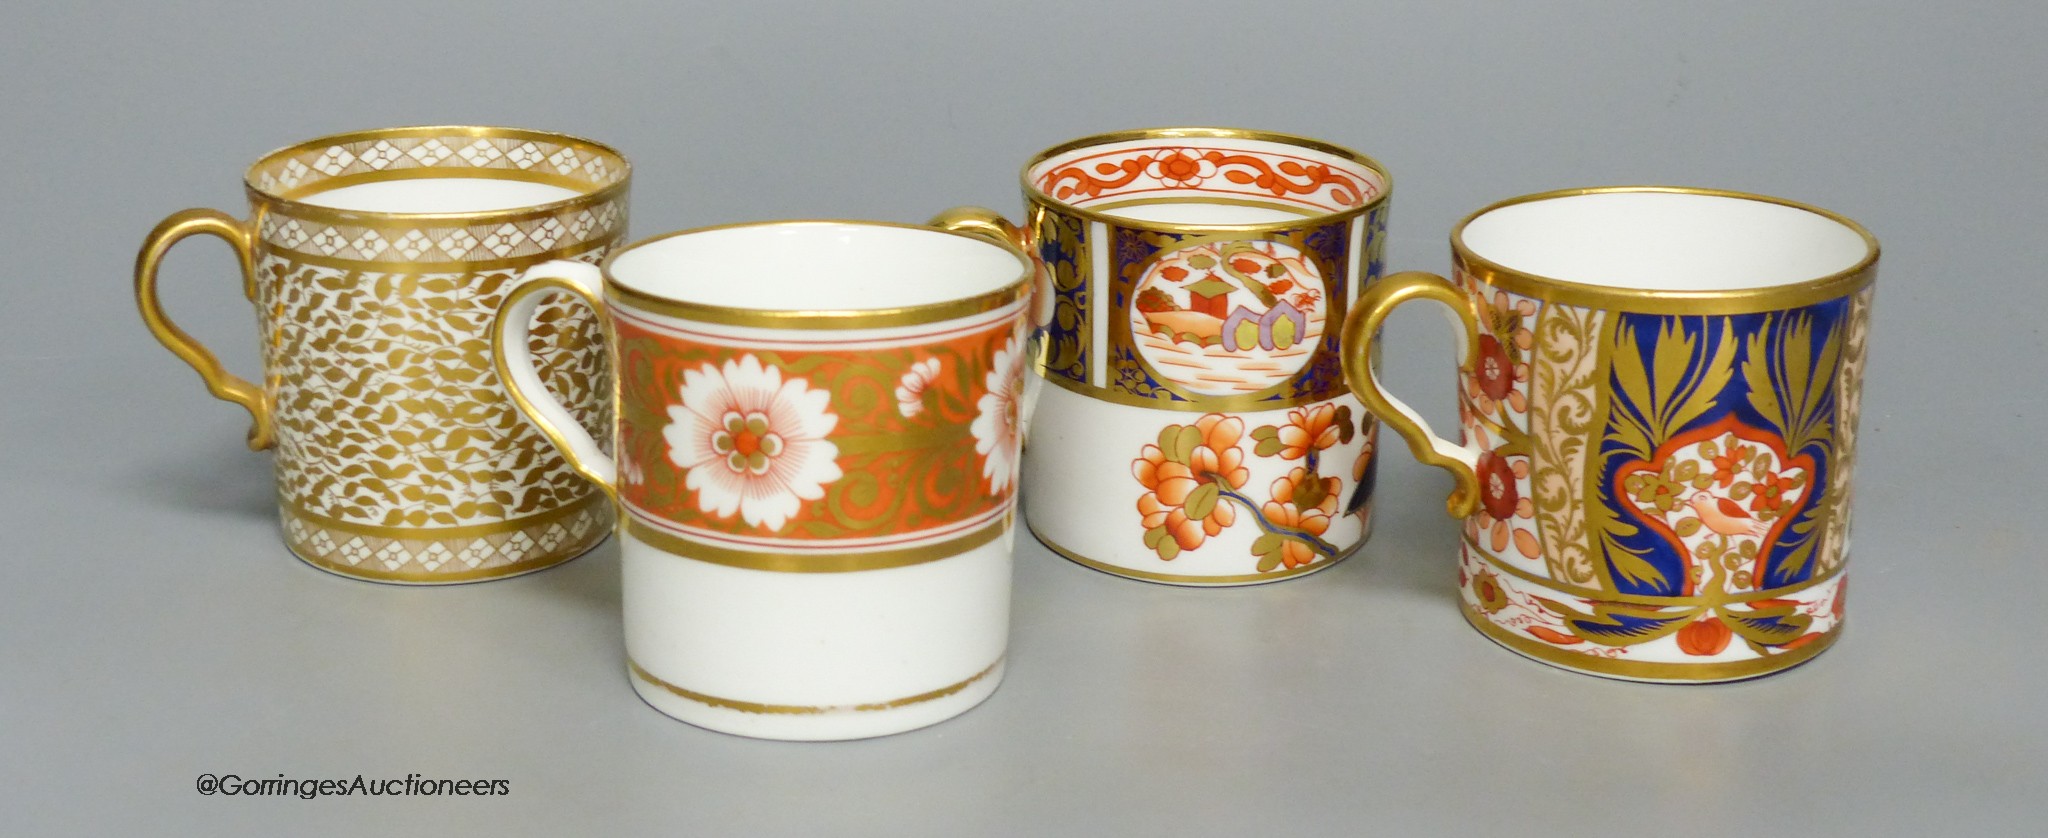 Four Regency Spode coffee cans